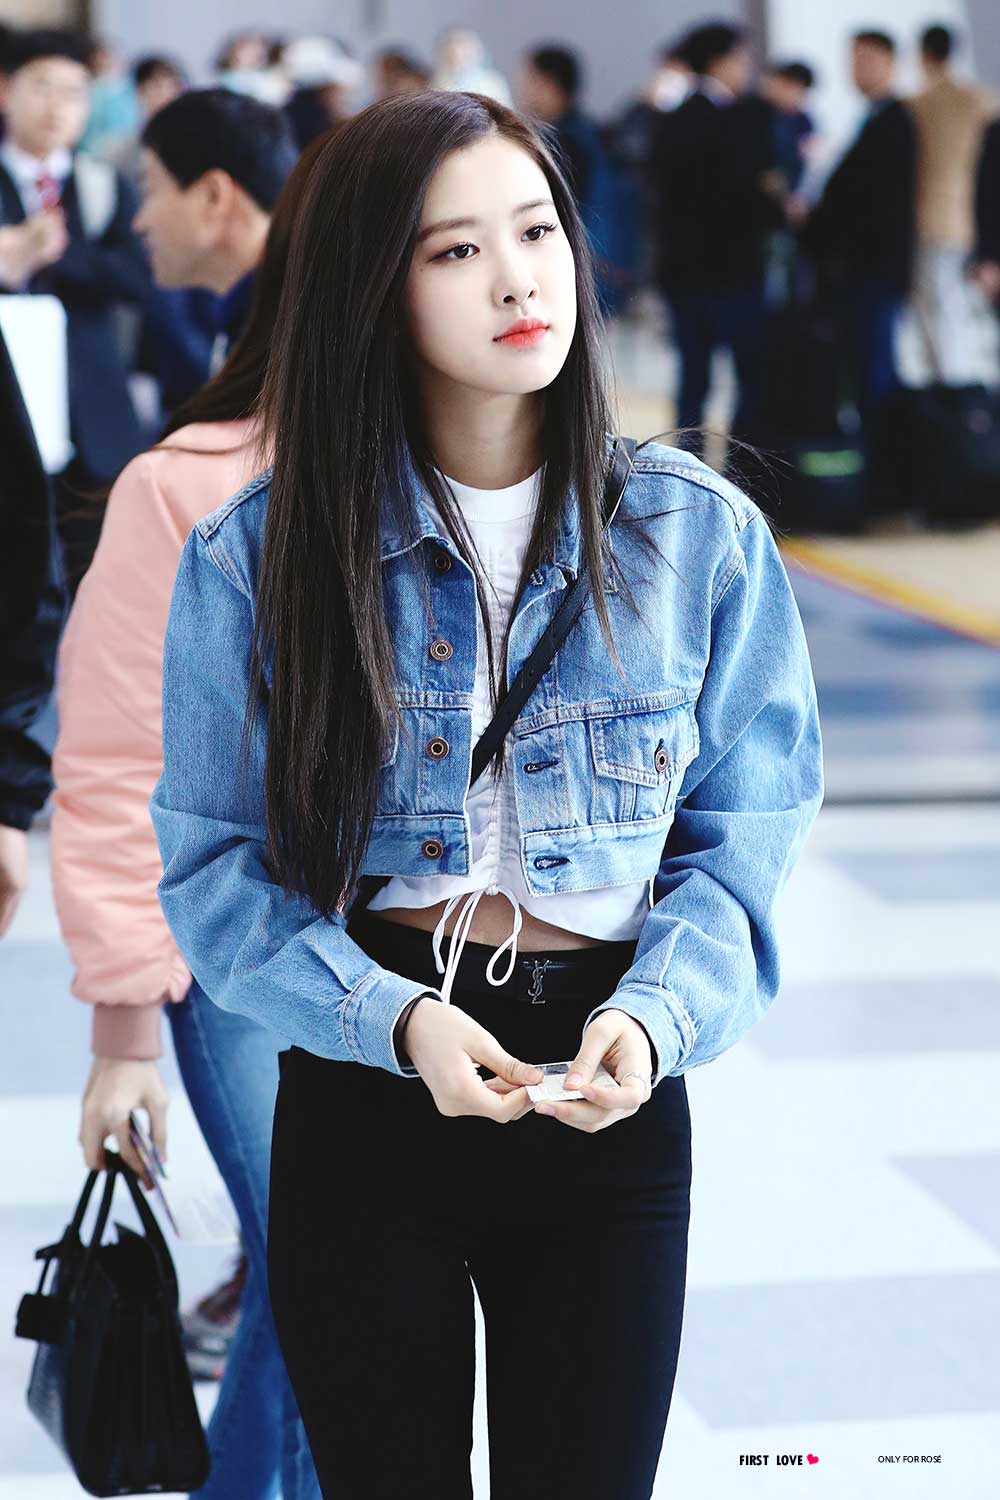 HQ Pics: Blackpink Rose Flawless Airport Look on March 25, 2018